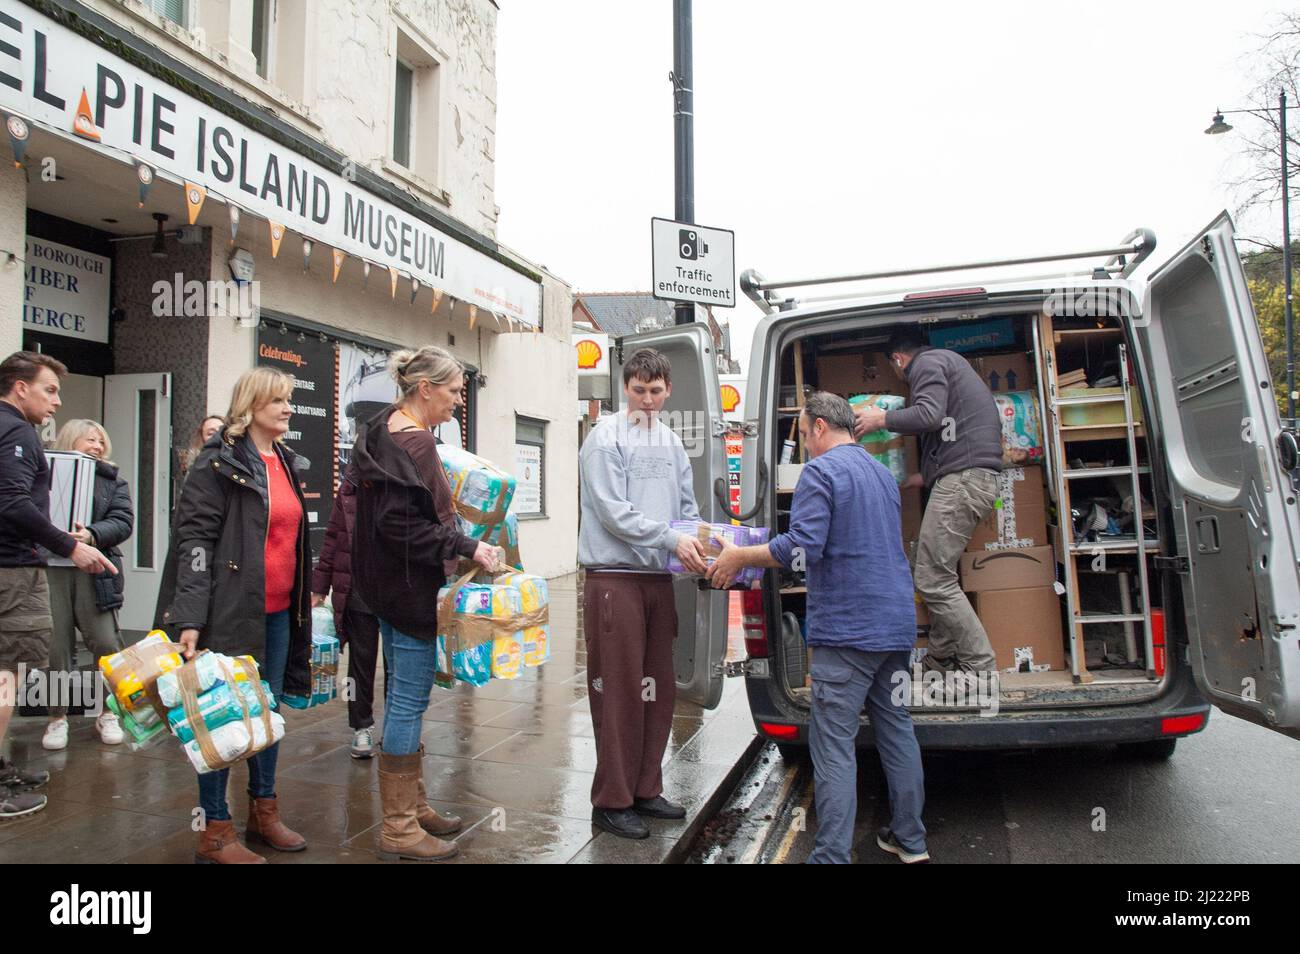 Volunteers loading up a van heading for the border of Western Ukraine outside Prosperity Restaurant and Eel Pie Island Museum, Twickenham, UK. Credit: Tricia de Courcy Ling/Alamy Live News Stock Photo